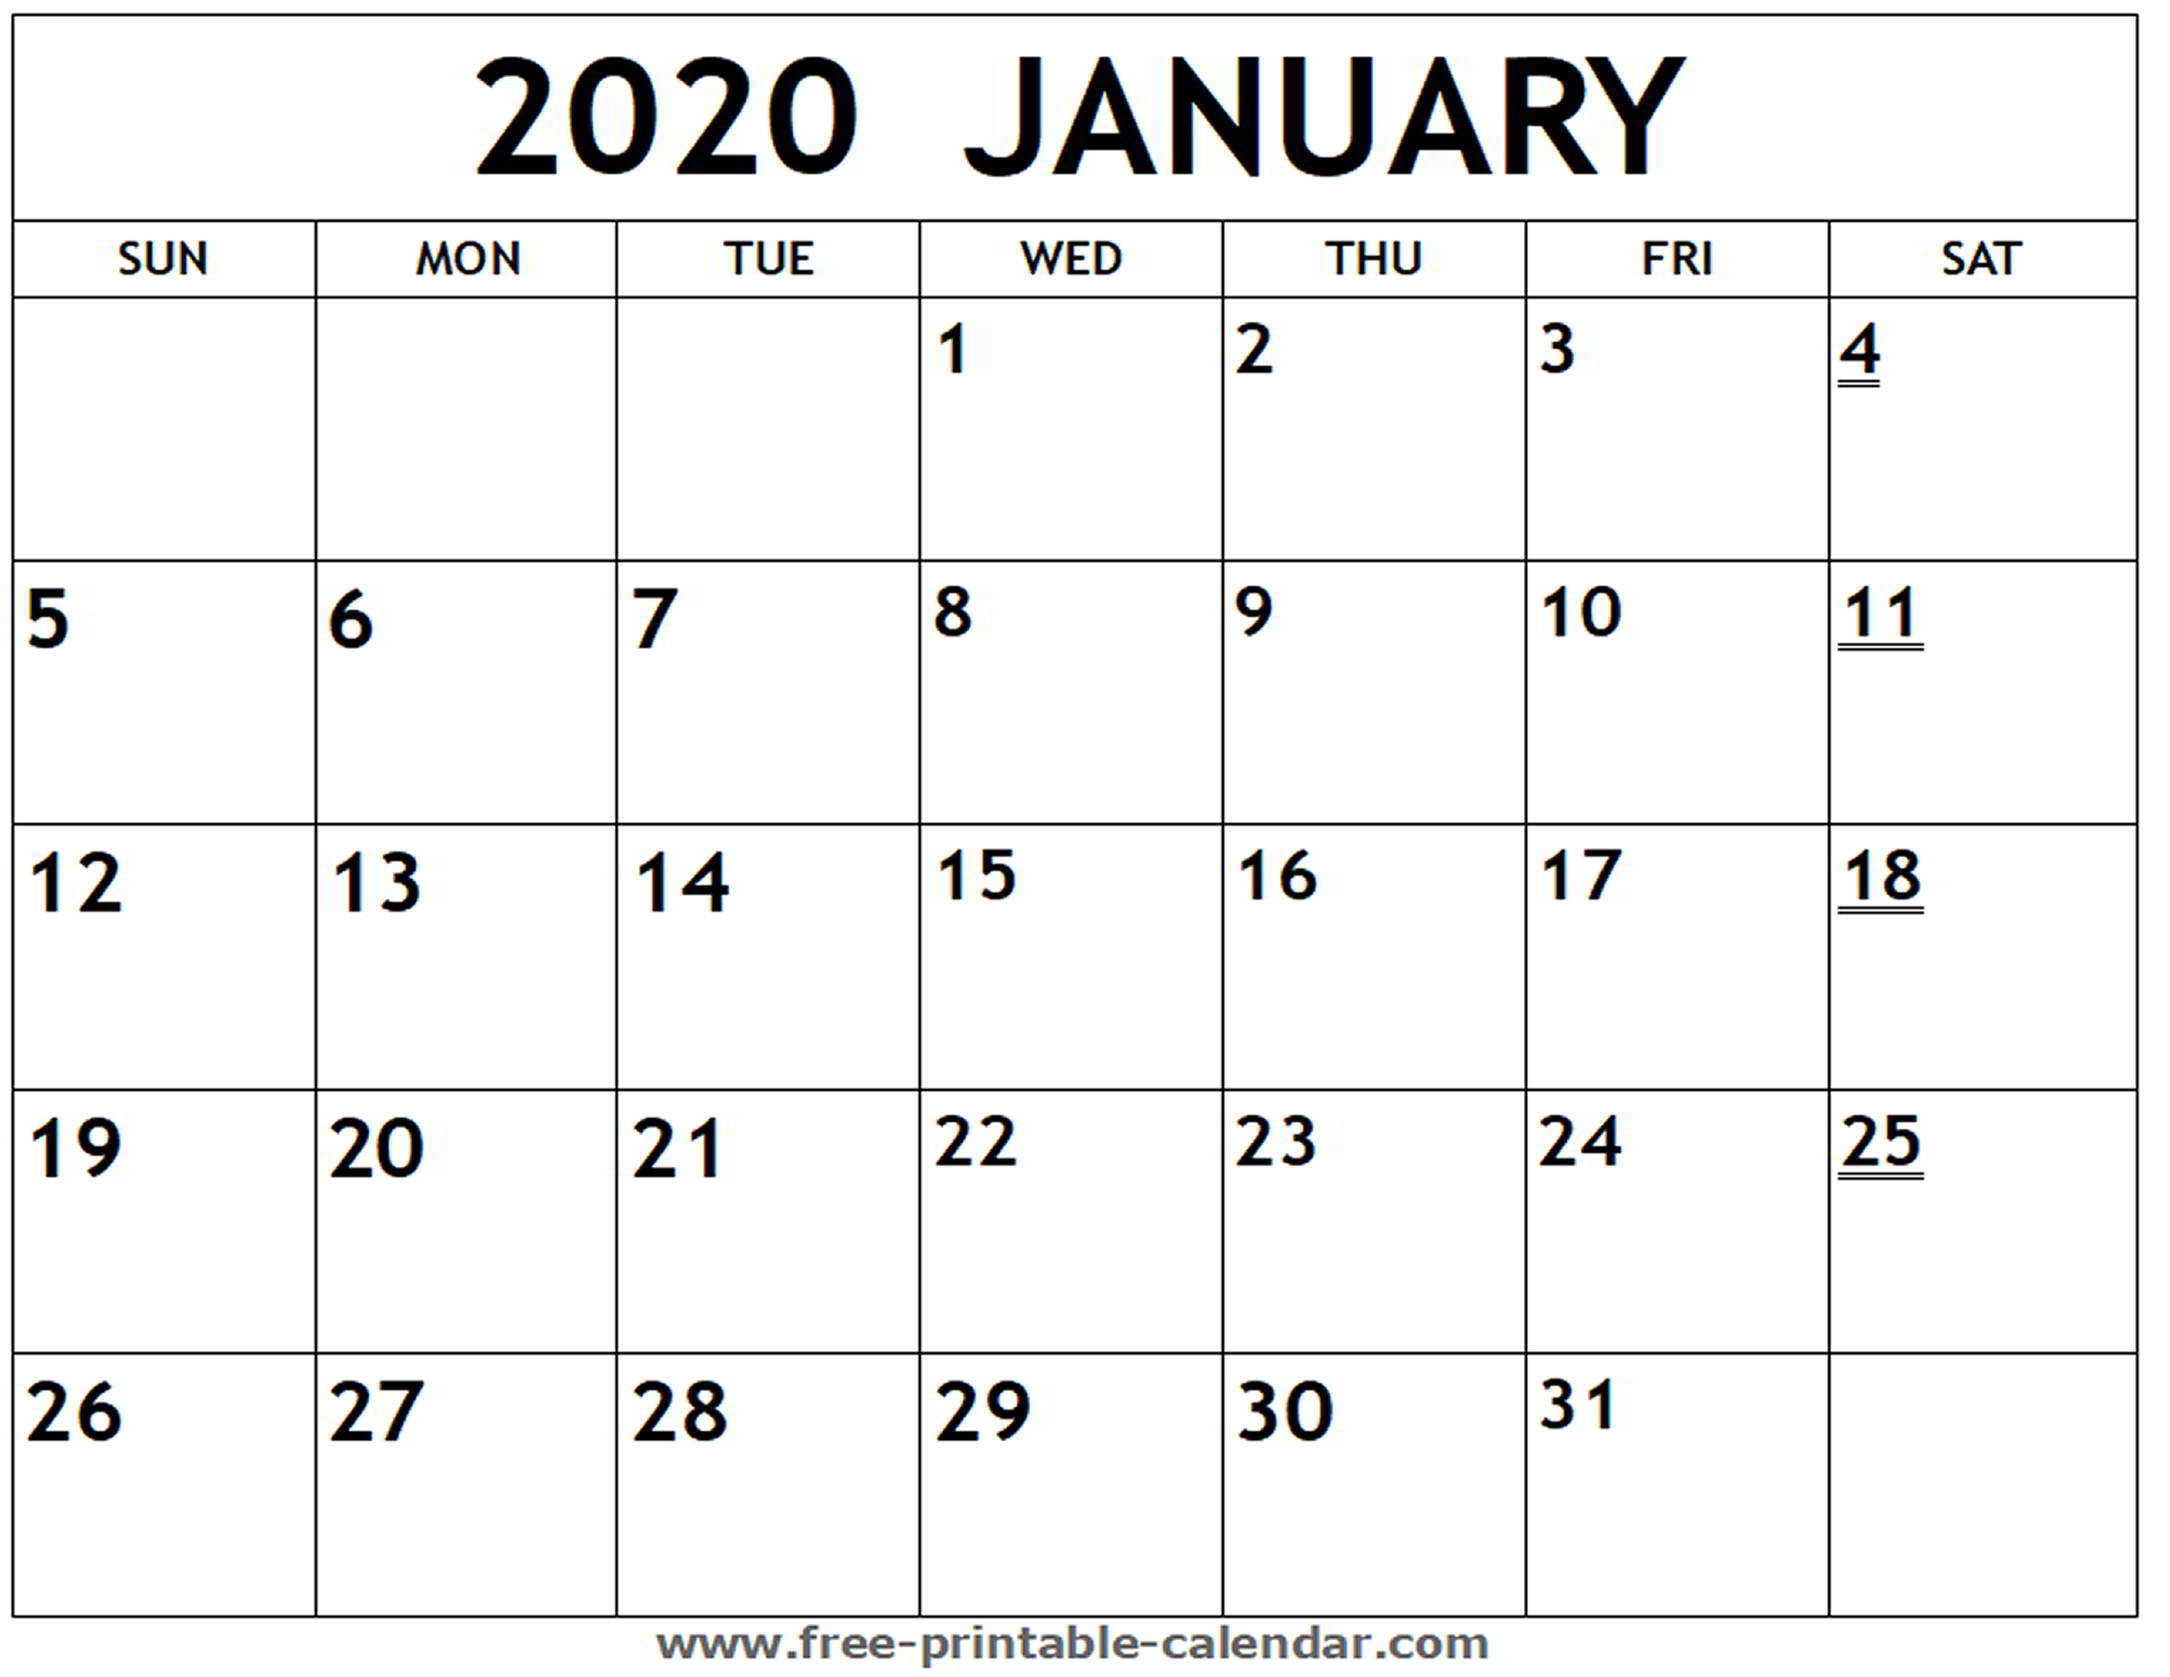 Free Printable Monthly Calendars 2020 - Togo.wpart.co